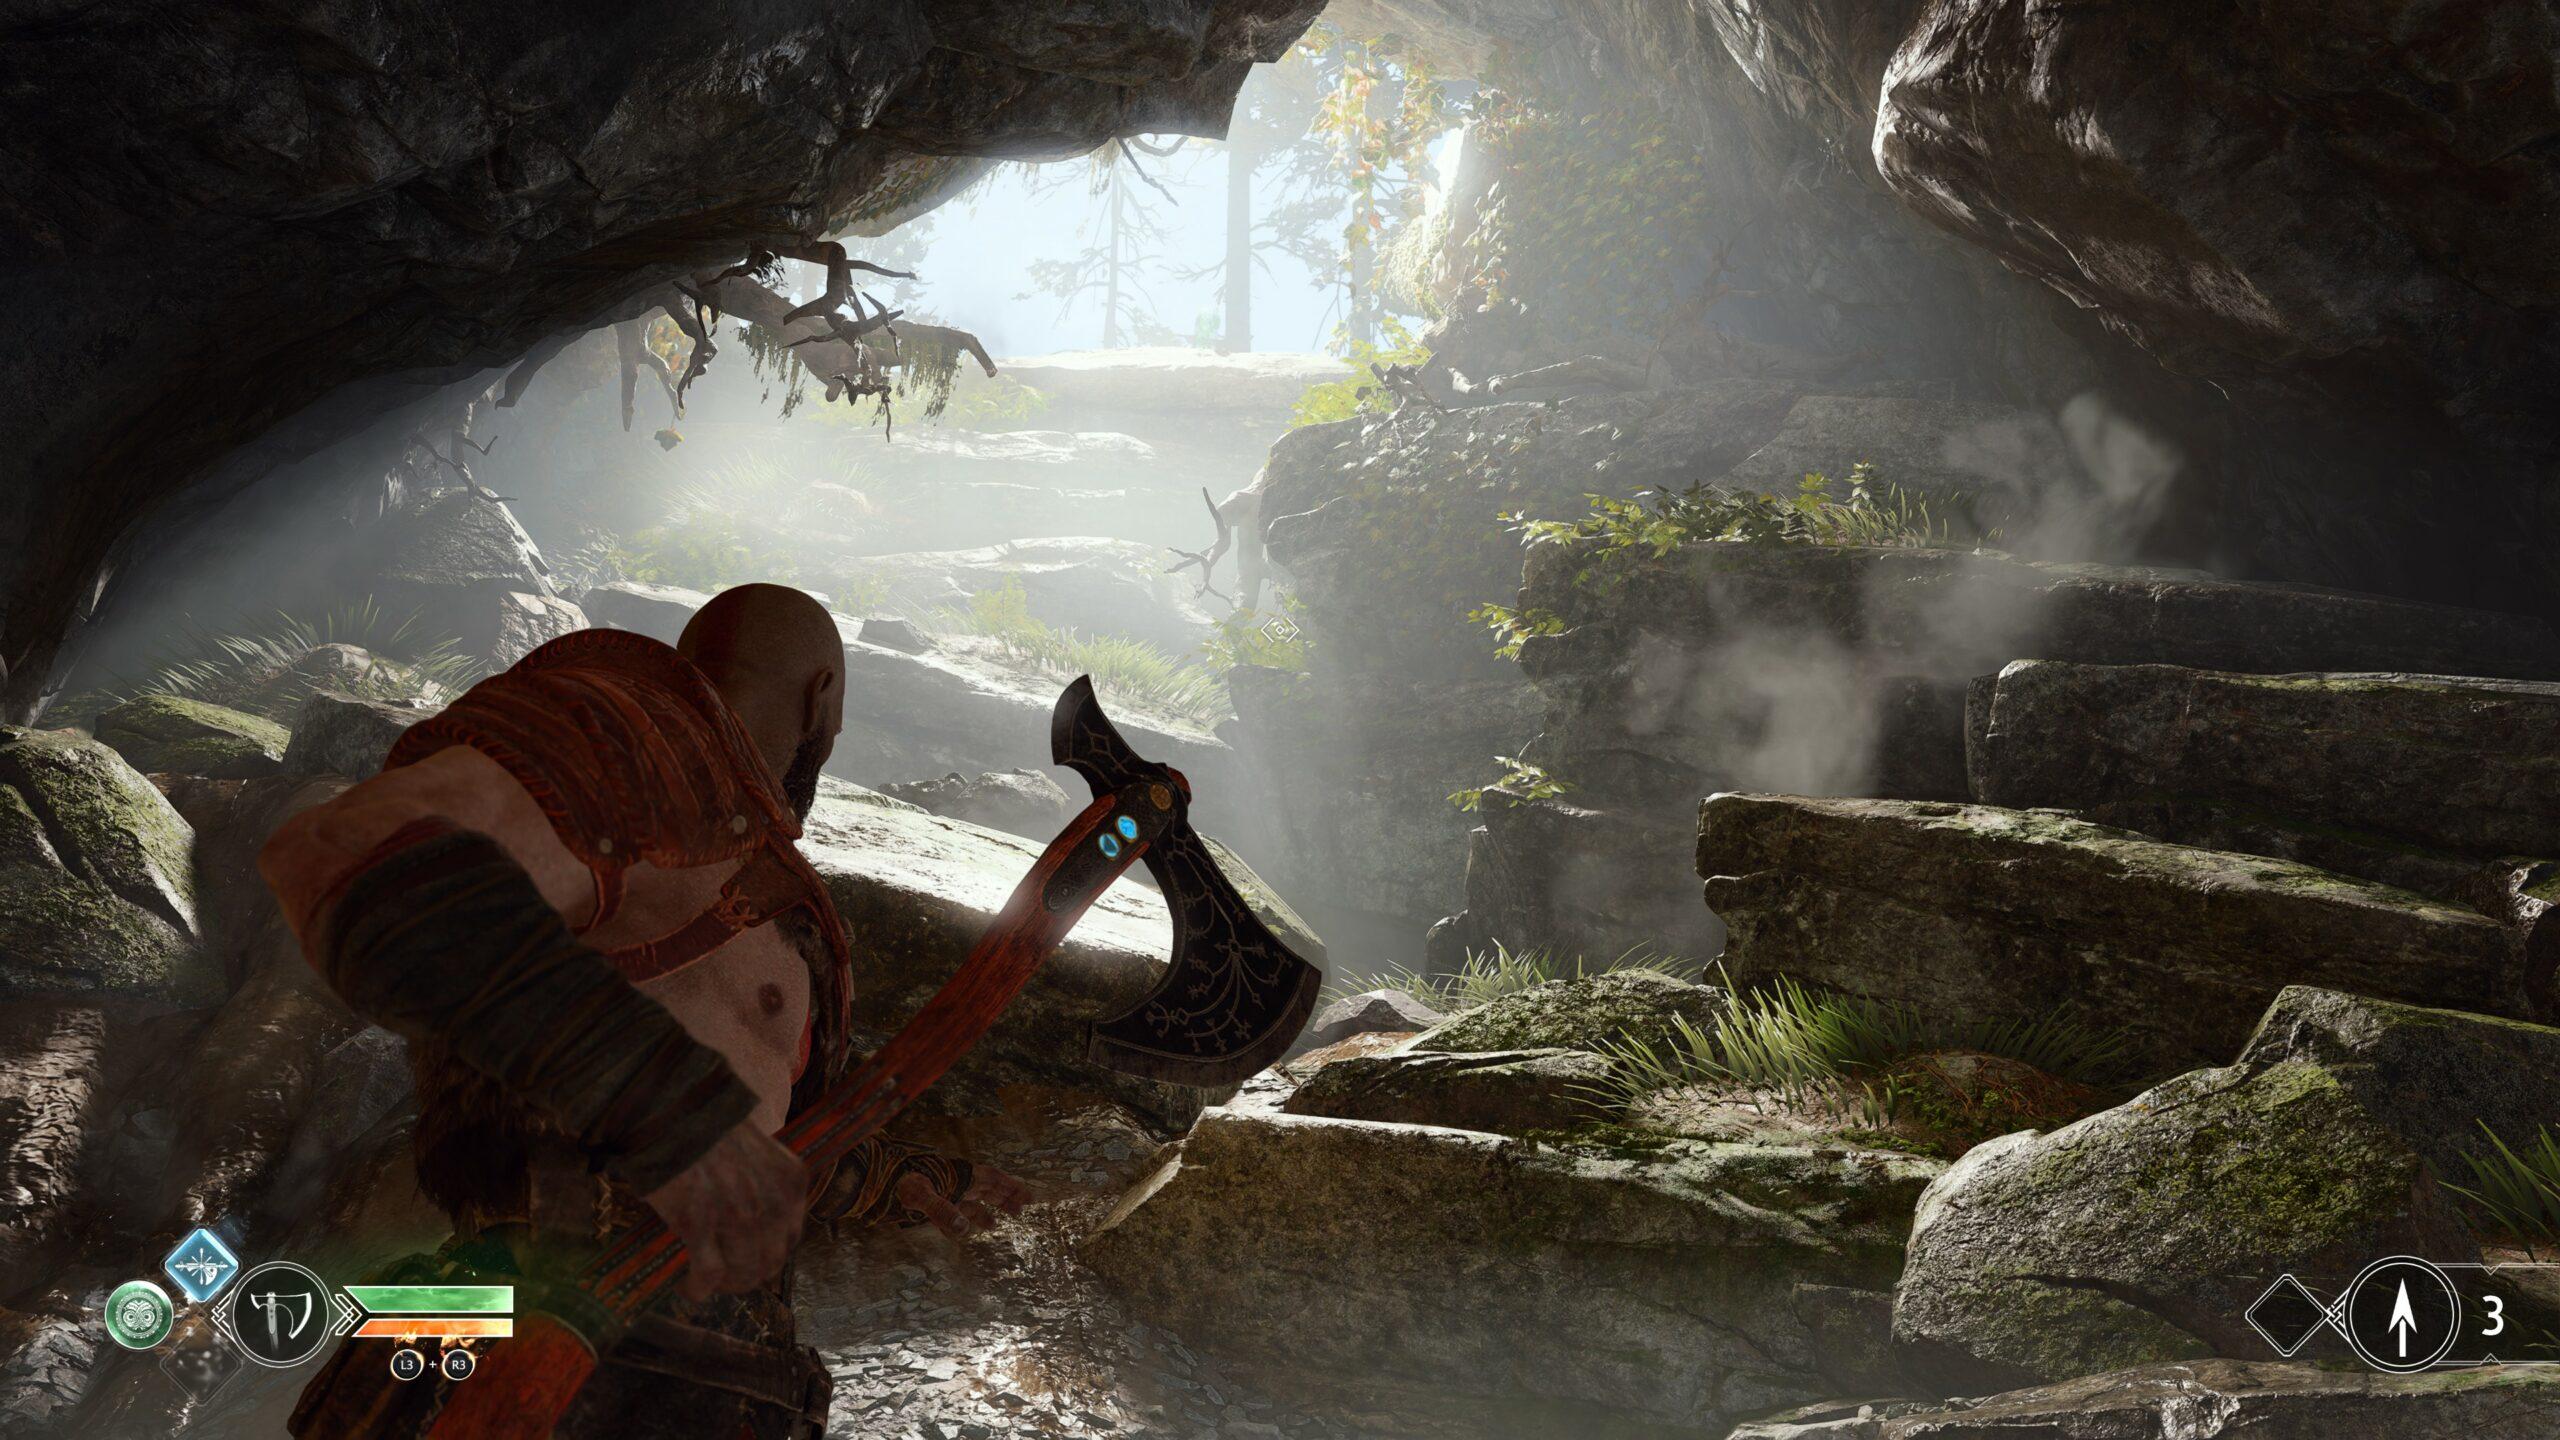 God of War PC Review: First-Rate Fatherhood